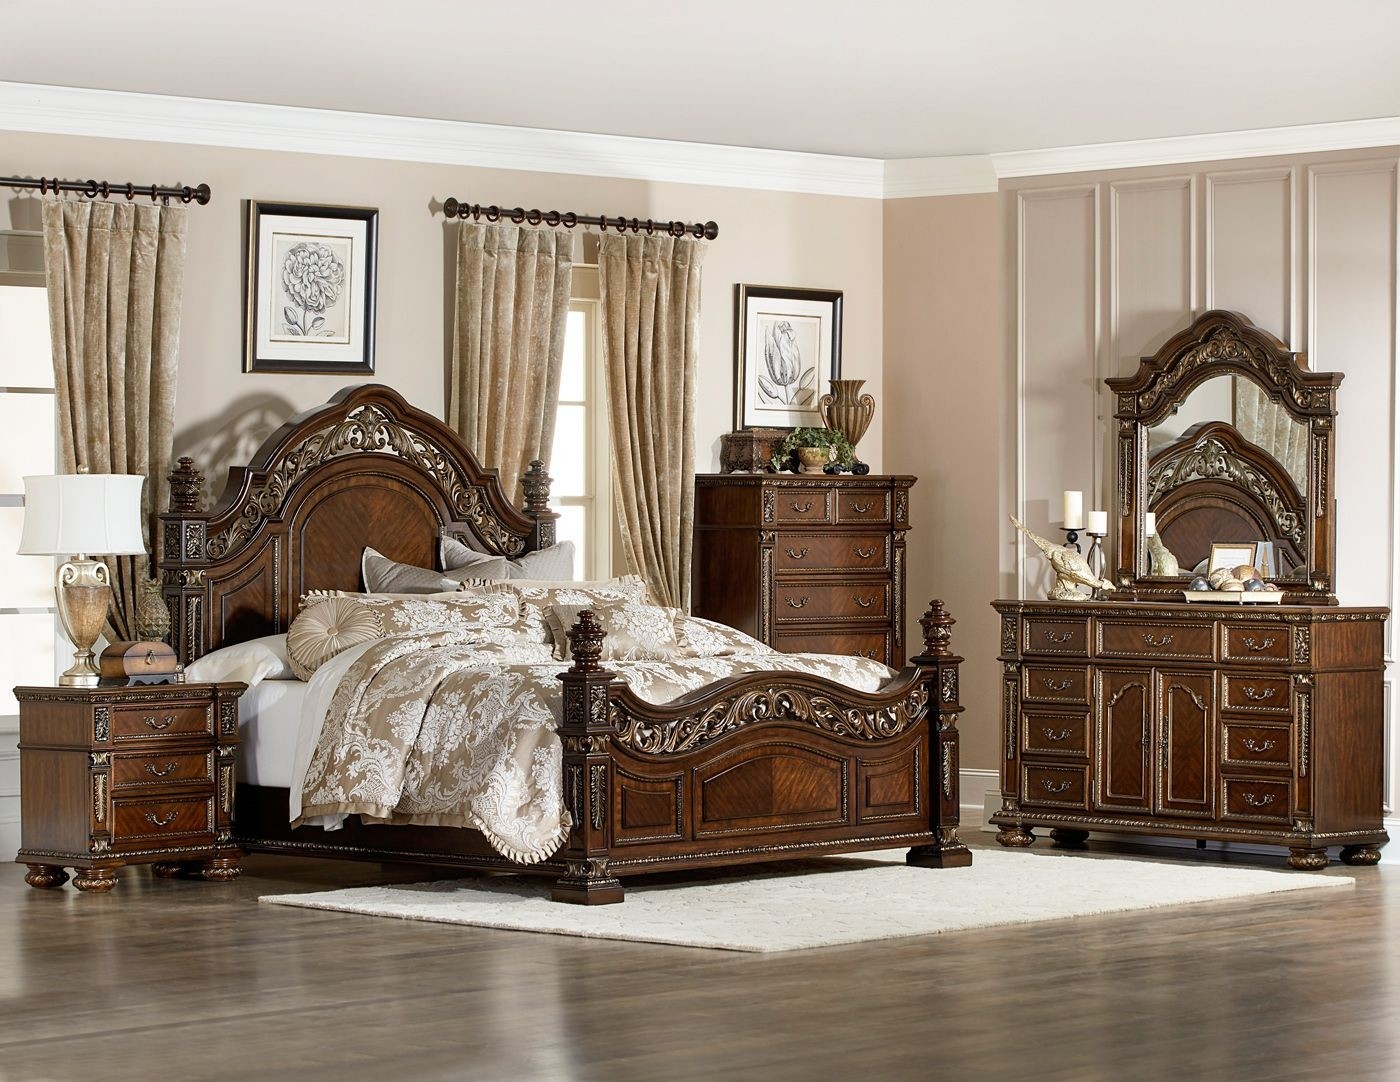 Dubarry poster bed traditional bedroom set wood metal